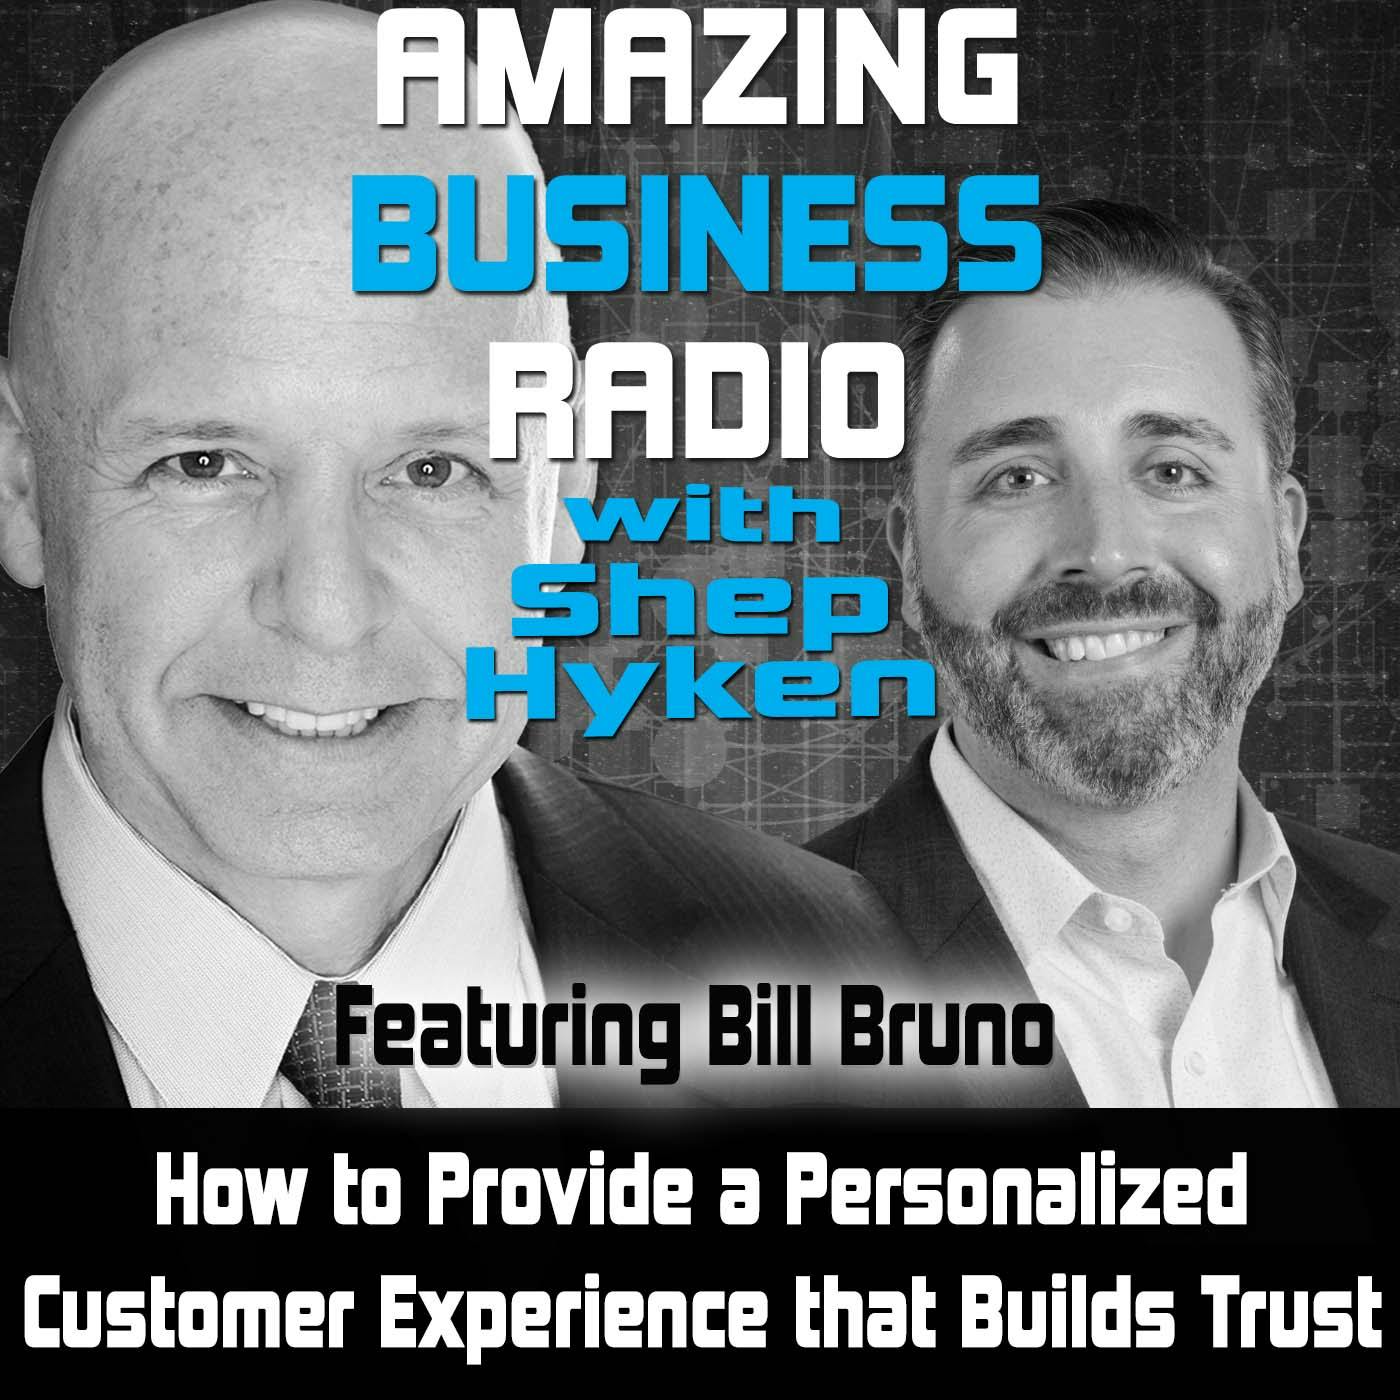 How to Provide a Personalized Customer Experience that Builds Trust Featuring Bill Bruno